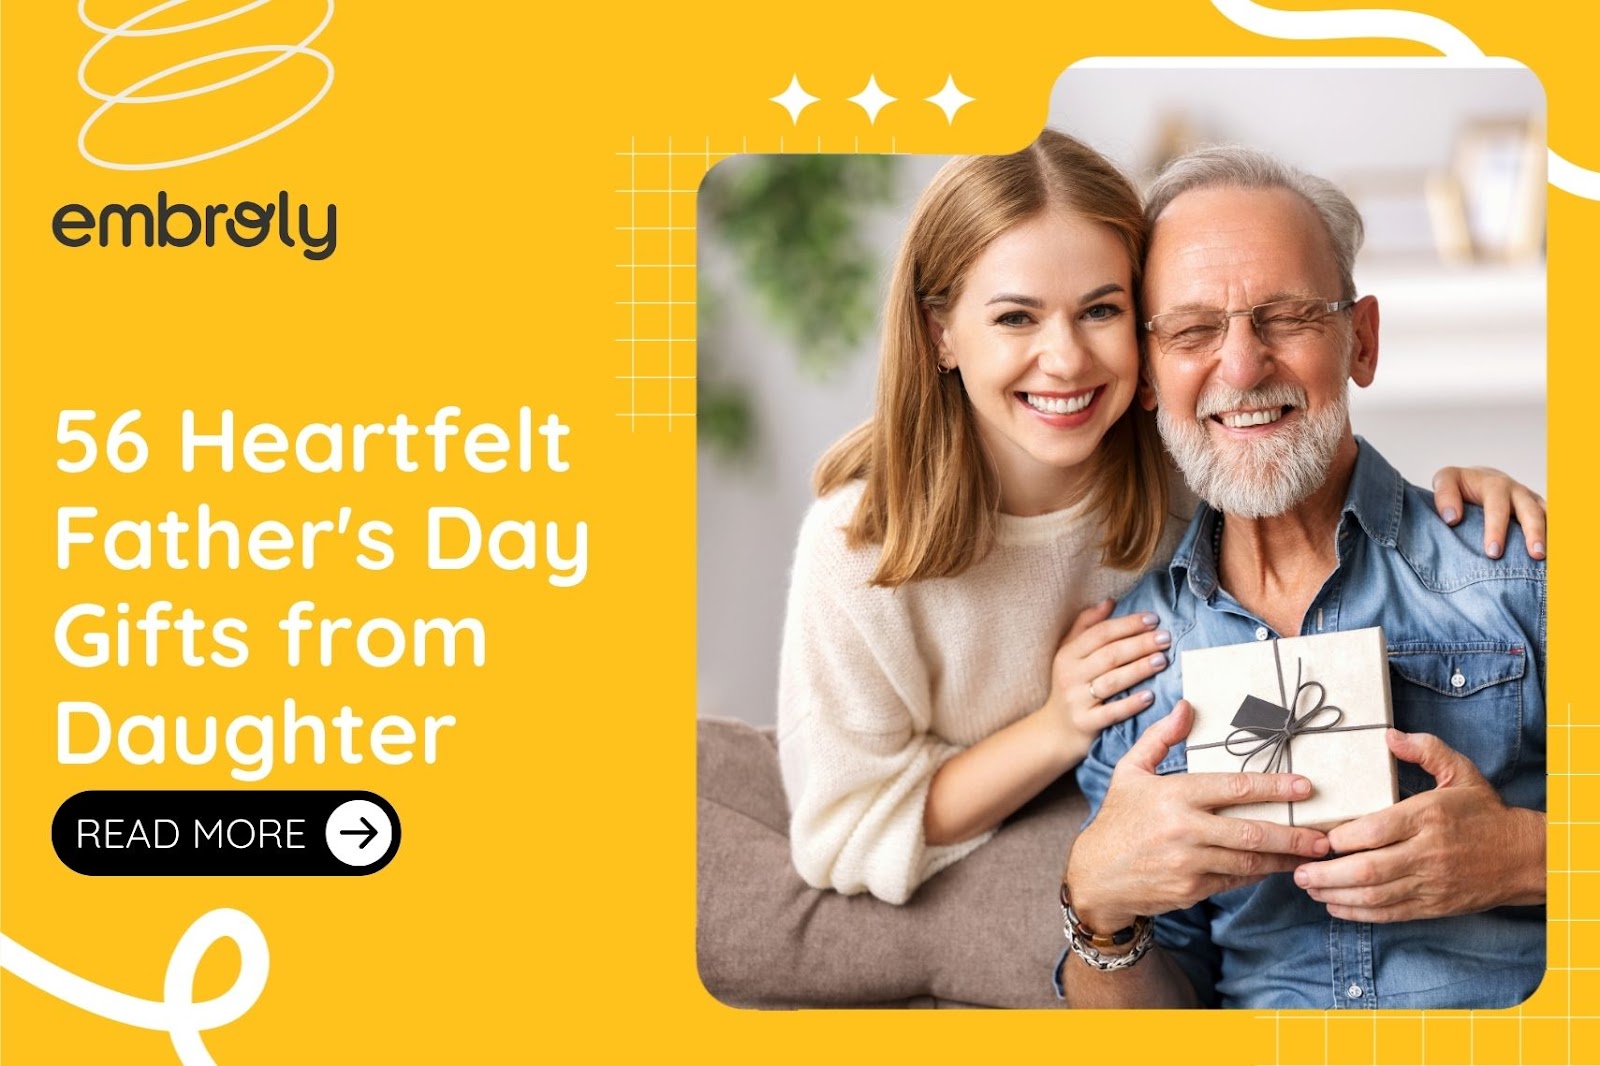 The 56 Heartfelt father's day gifts from daughter He'll Treasure Always